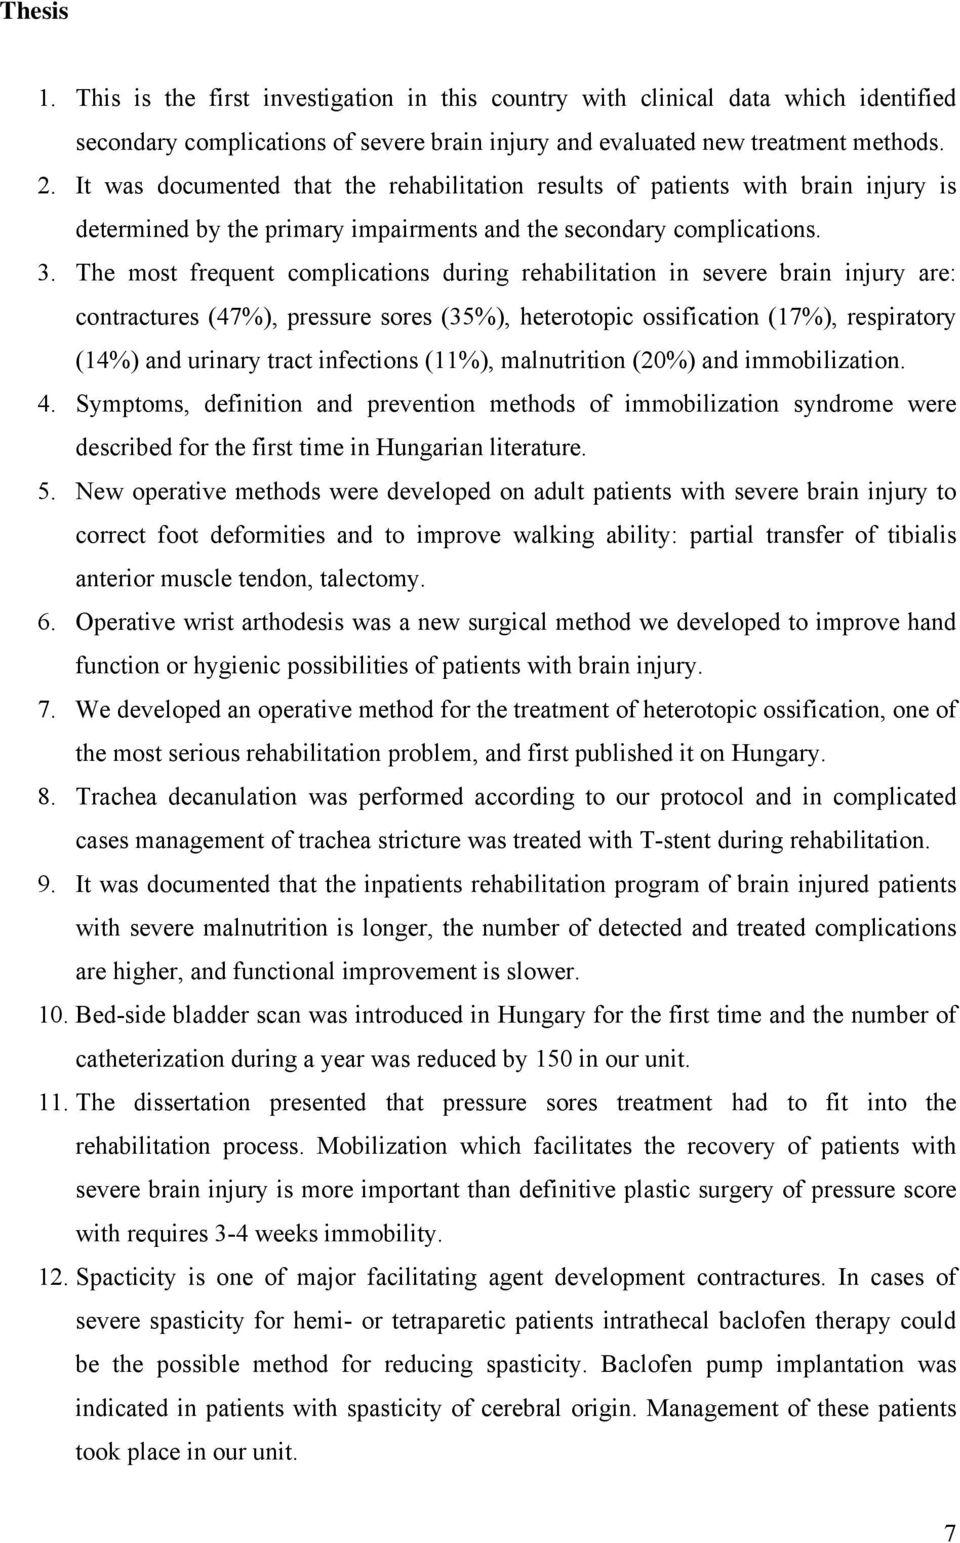 The most frequent complications during rehabilitation in severe brain injury are: contractures (47%), pressure sores (35%), heterotopic ossification (17%), respiratory (14%) and urinary tract